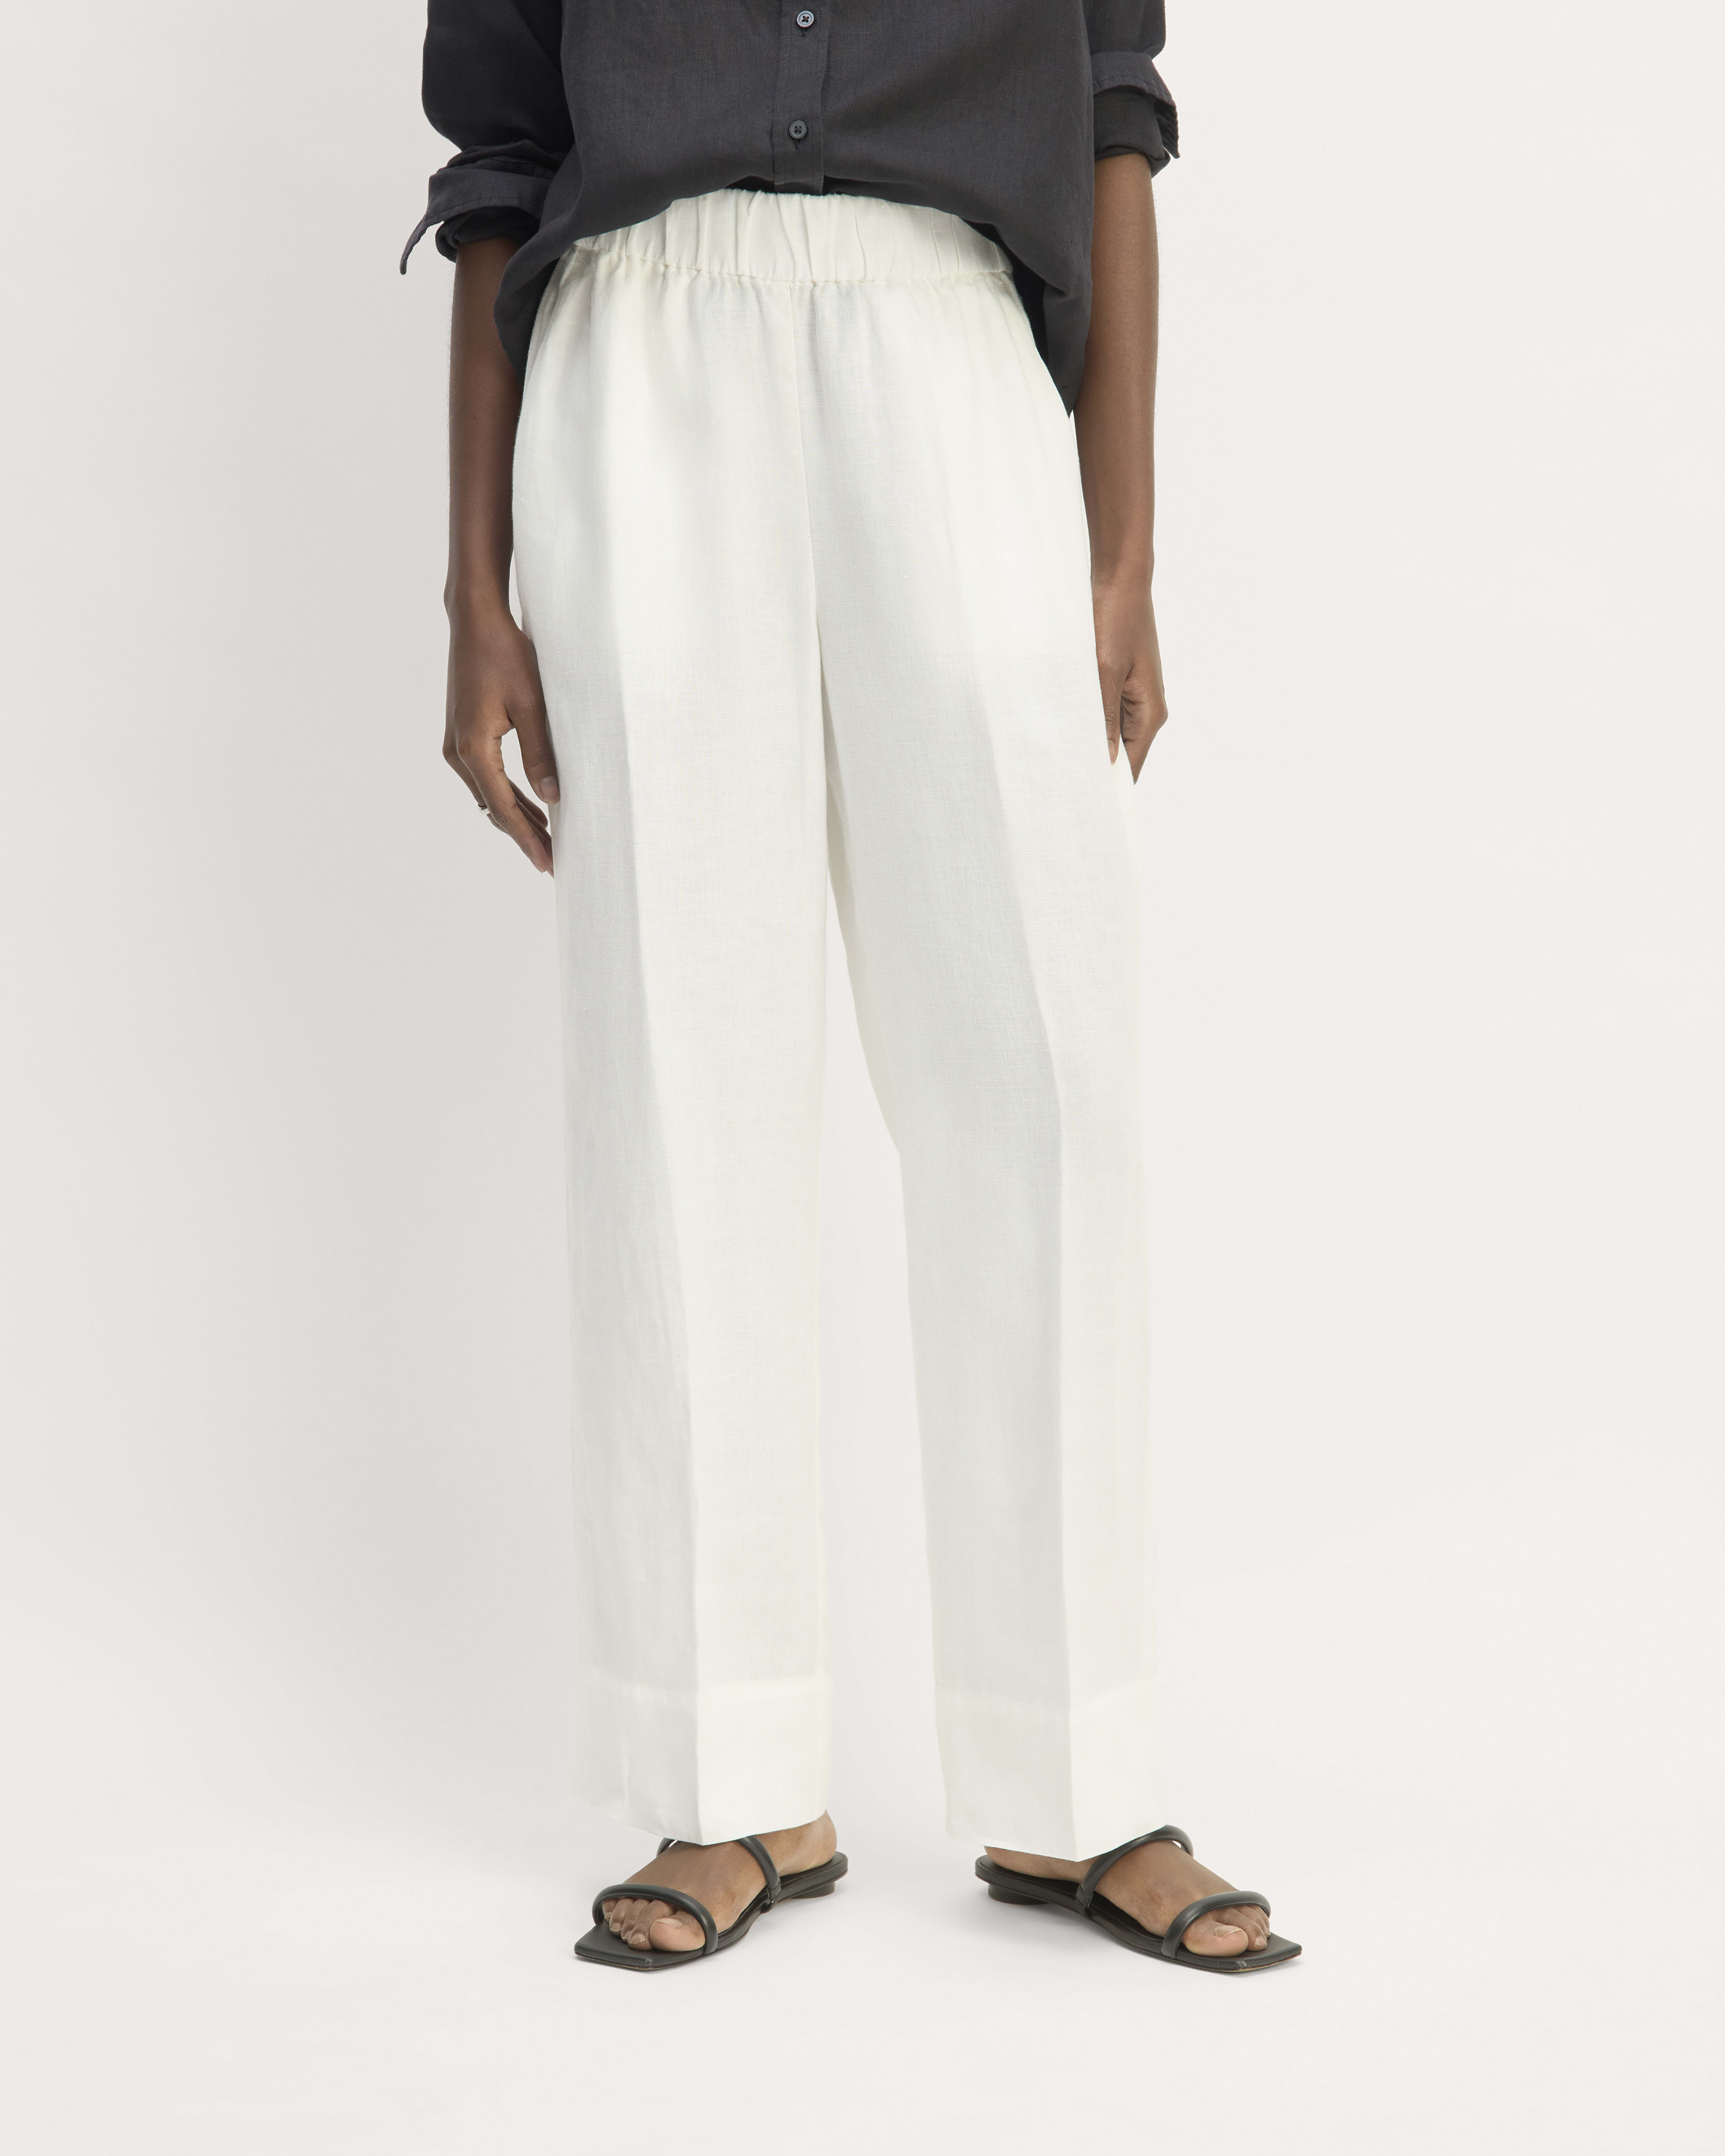 The Linen Easy Pant